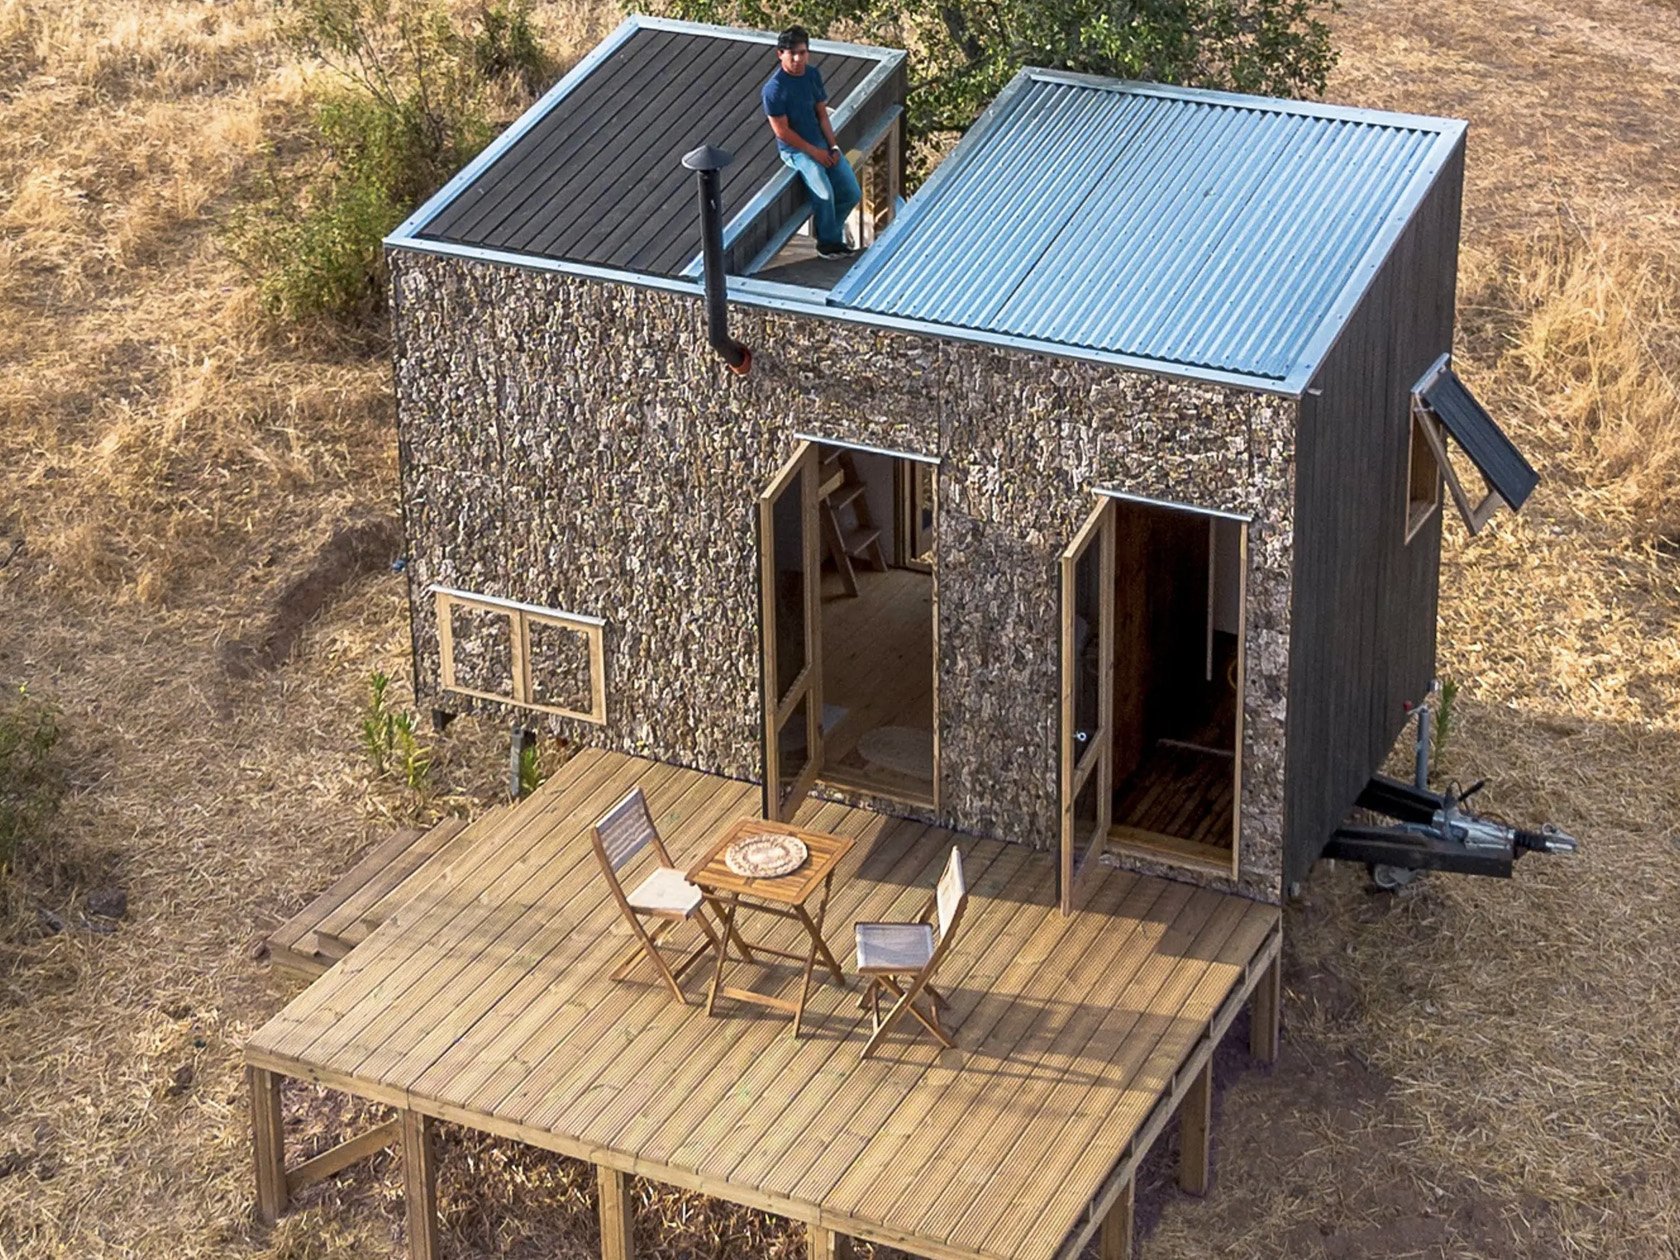 This Tiny Home Is Portugal Features A Cork & Timber Clad Exterior & A Compact Interior